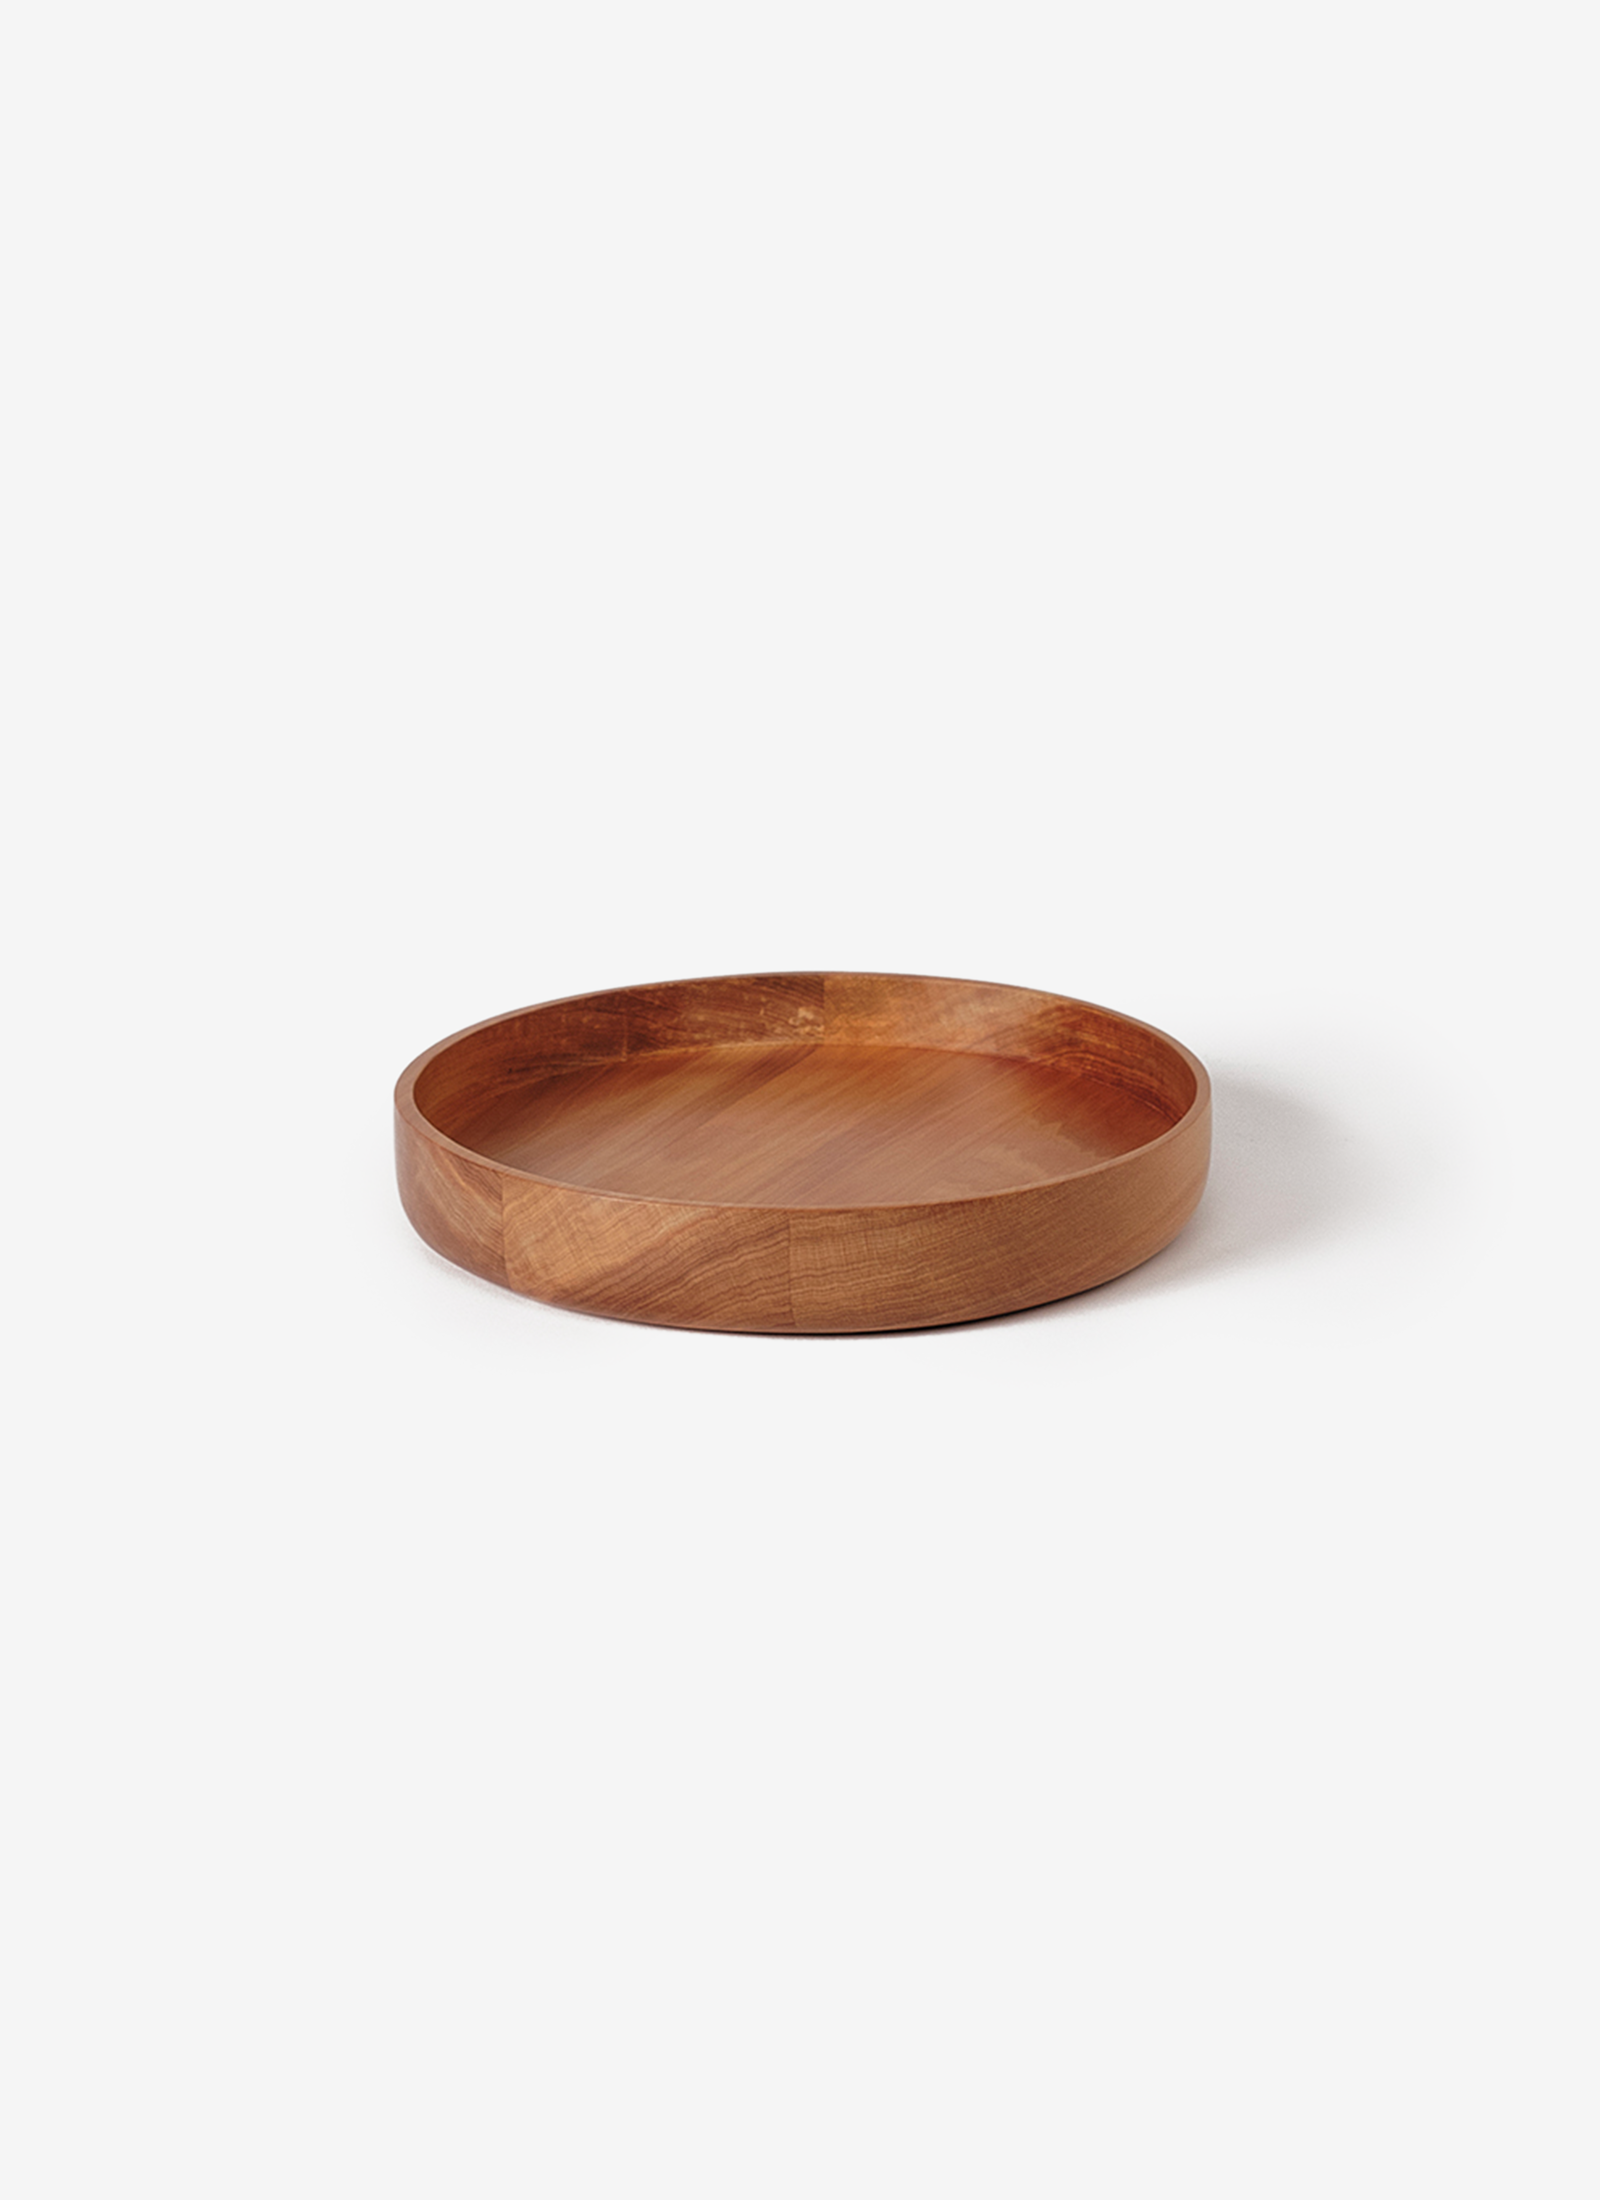 Small Bowl in Swamp Kauri